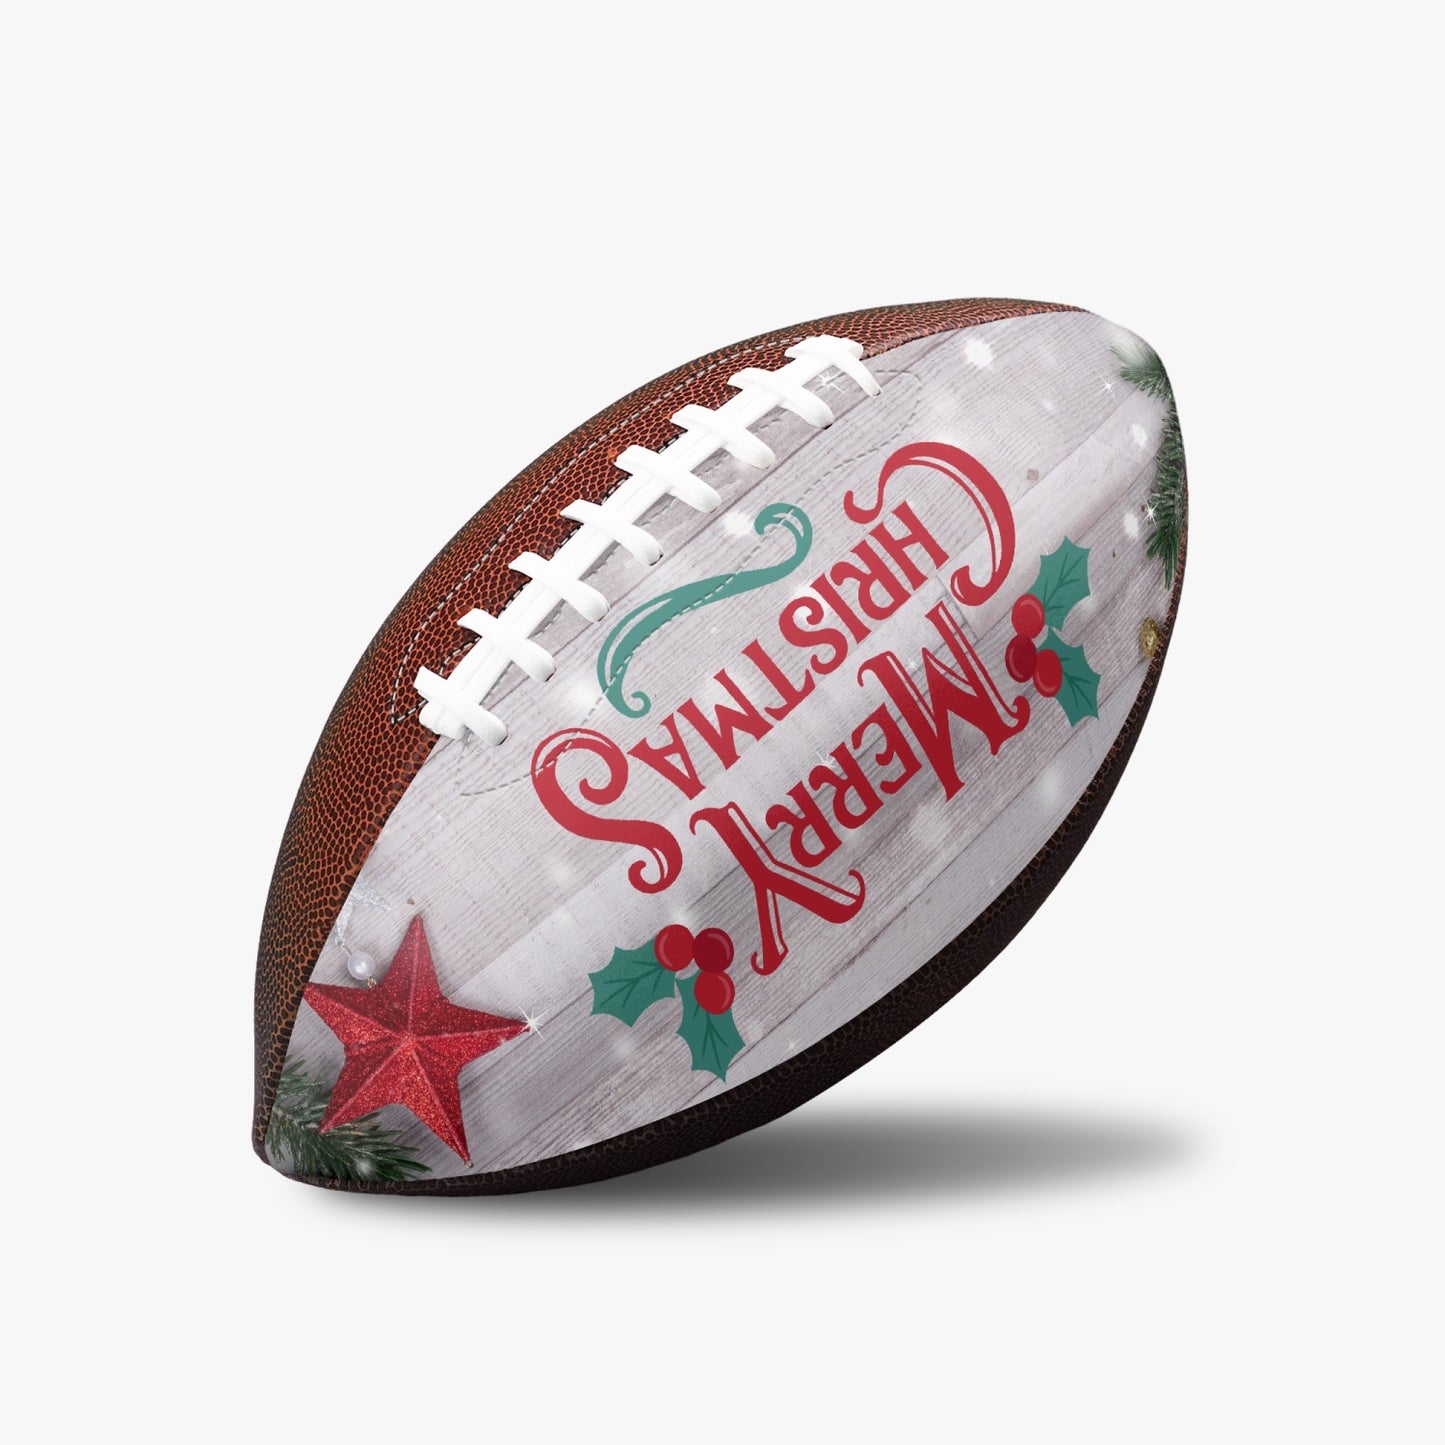 Official size NFL Merry Christmas Football